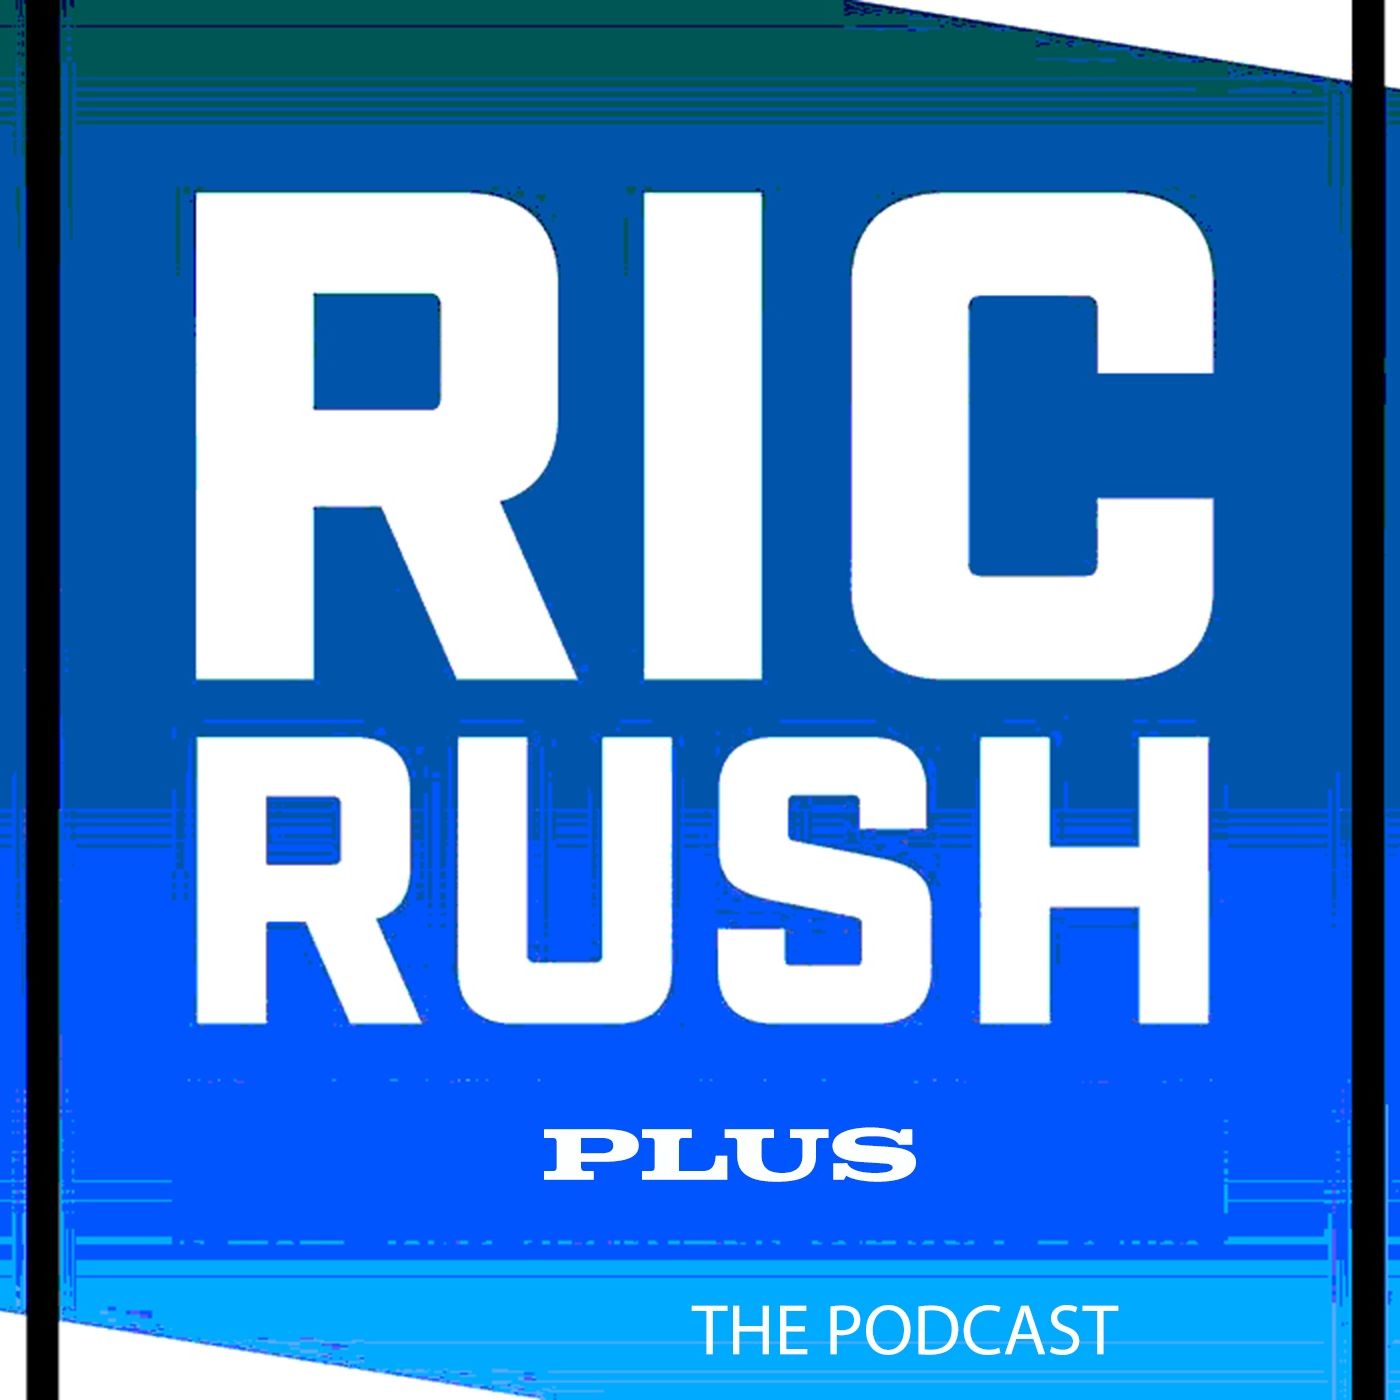 Ric’s “At Least I Showed Up” Podcast